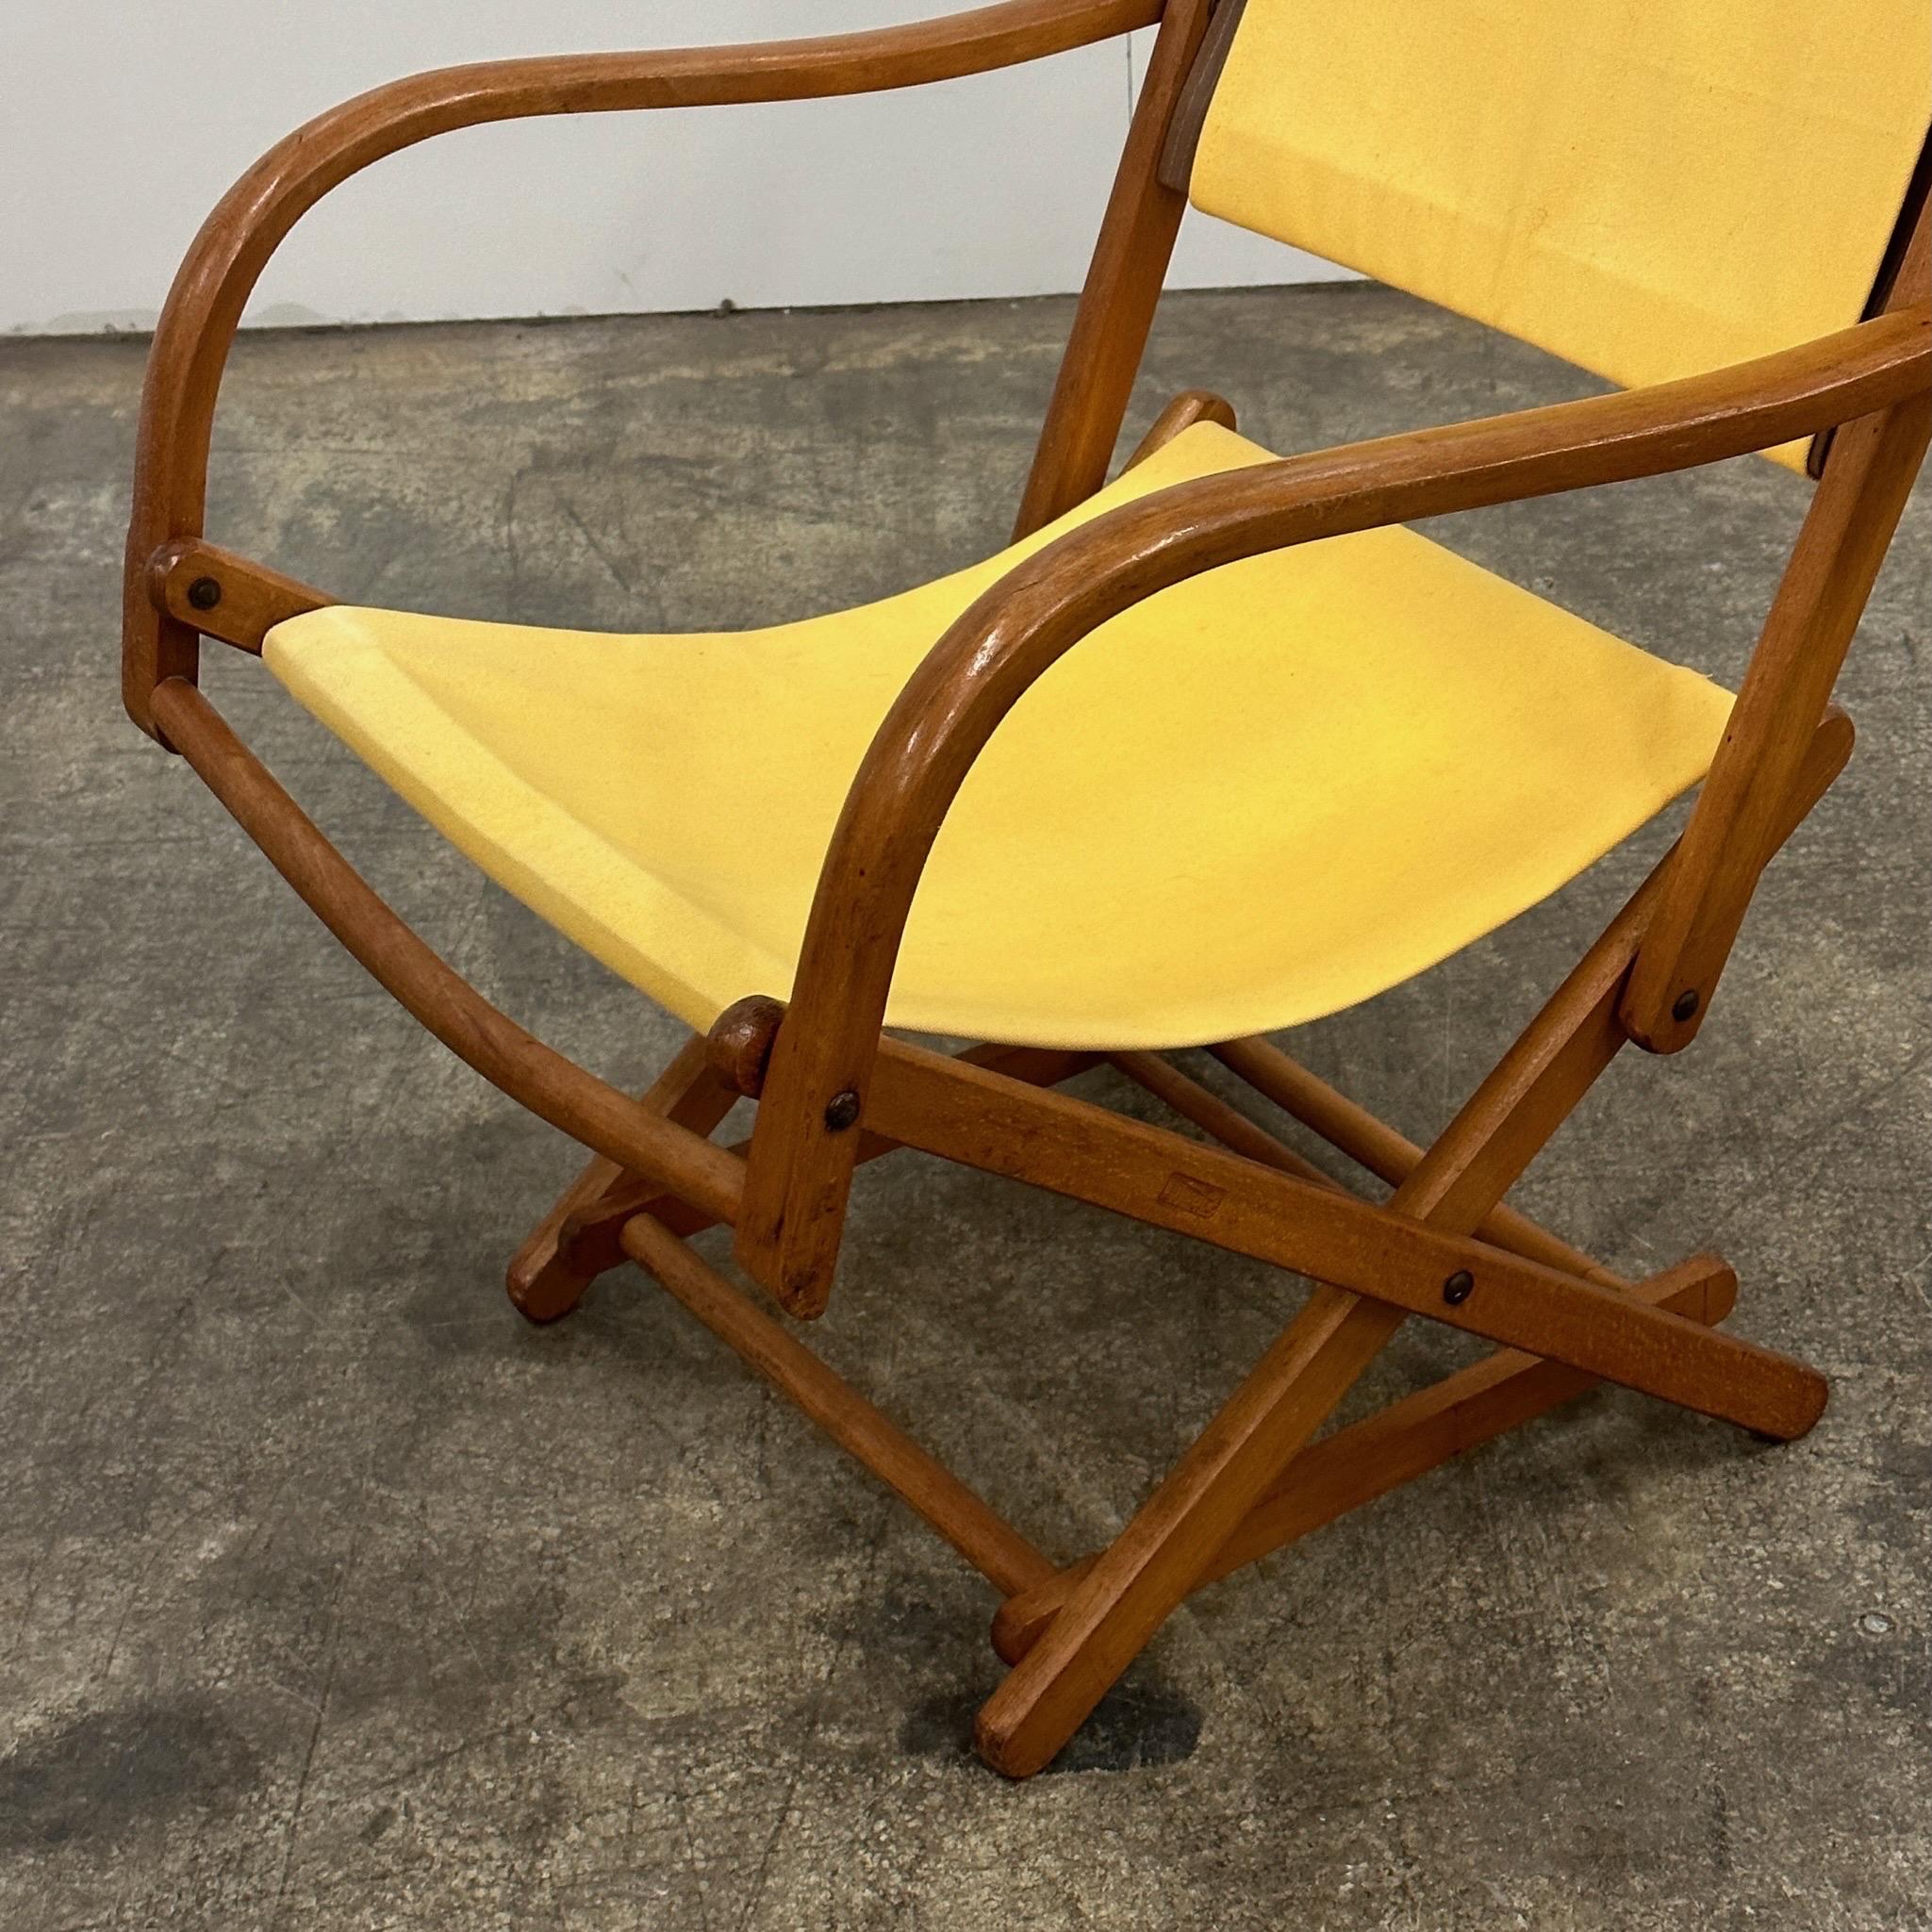 c. 1950s. Folding chair made in Denmark. Yellow canvas upholstery. 